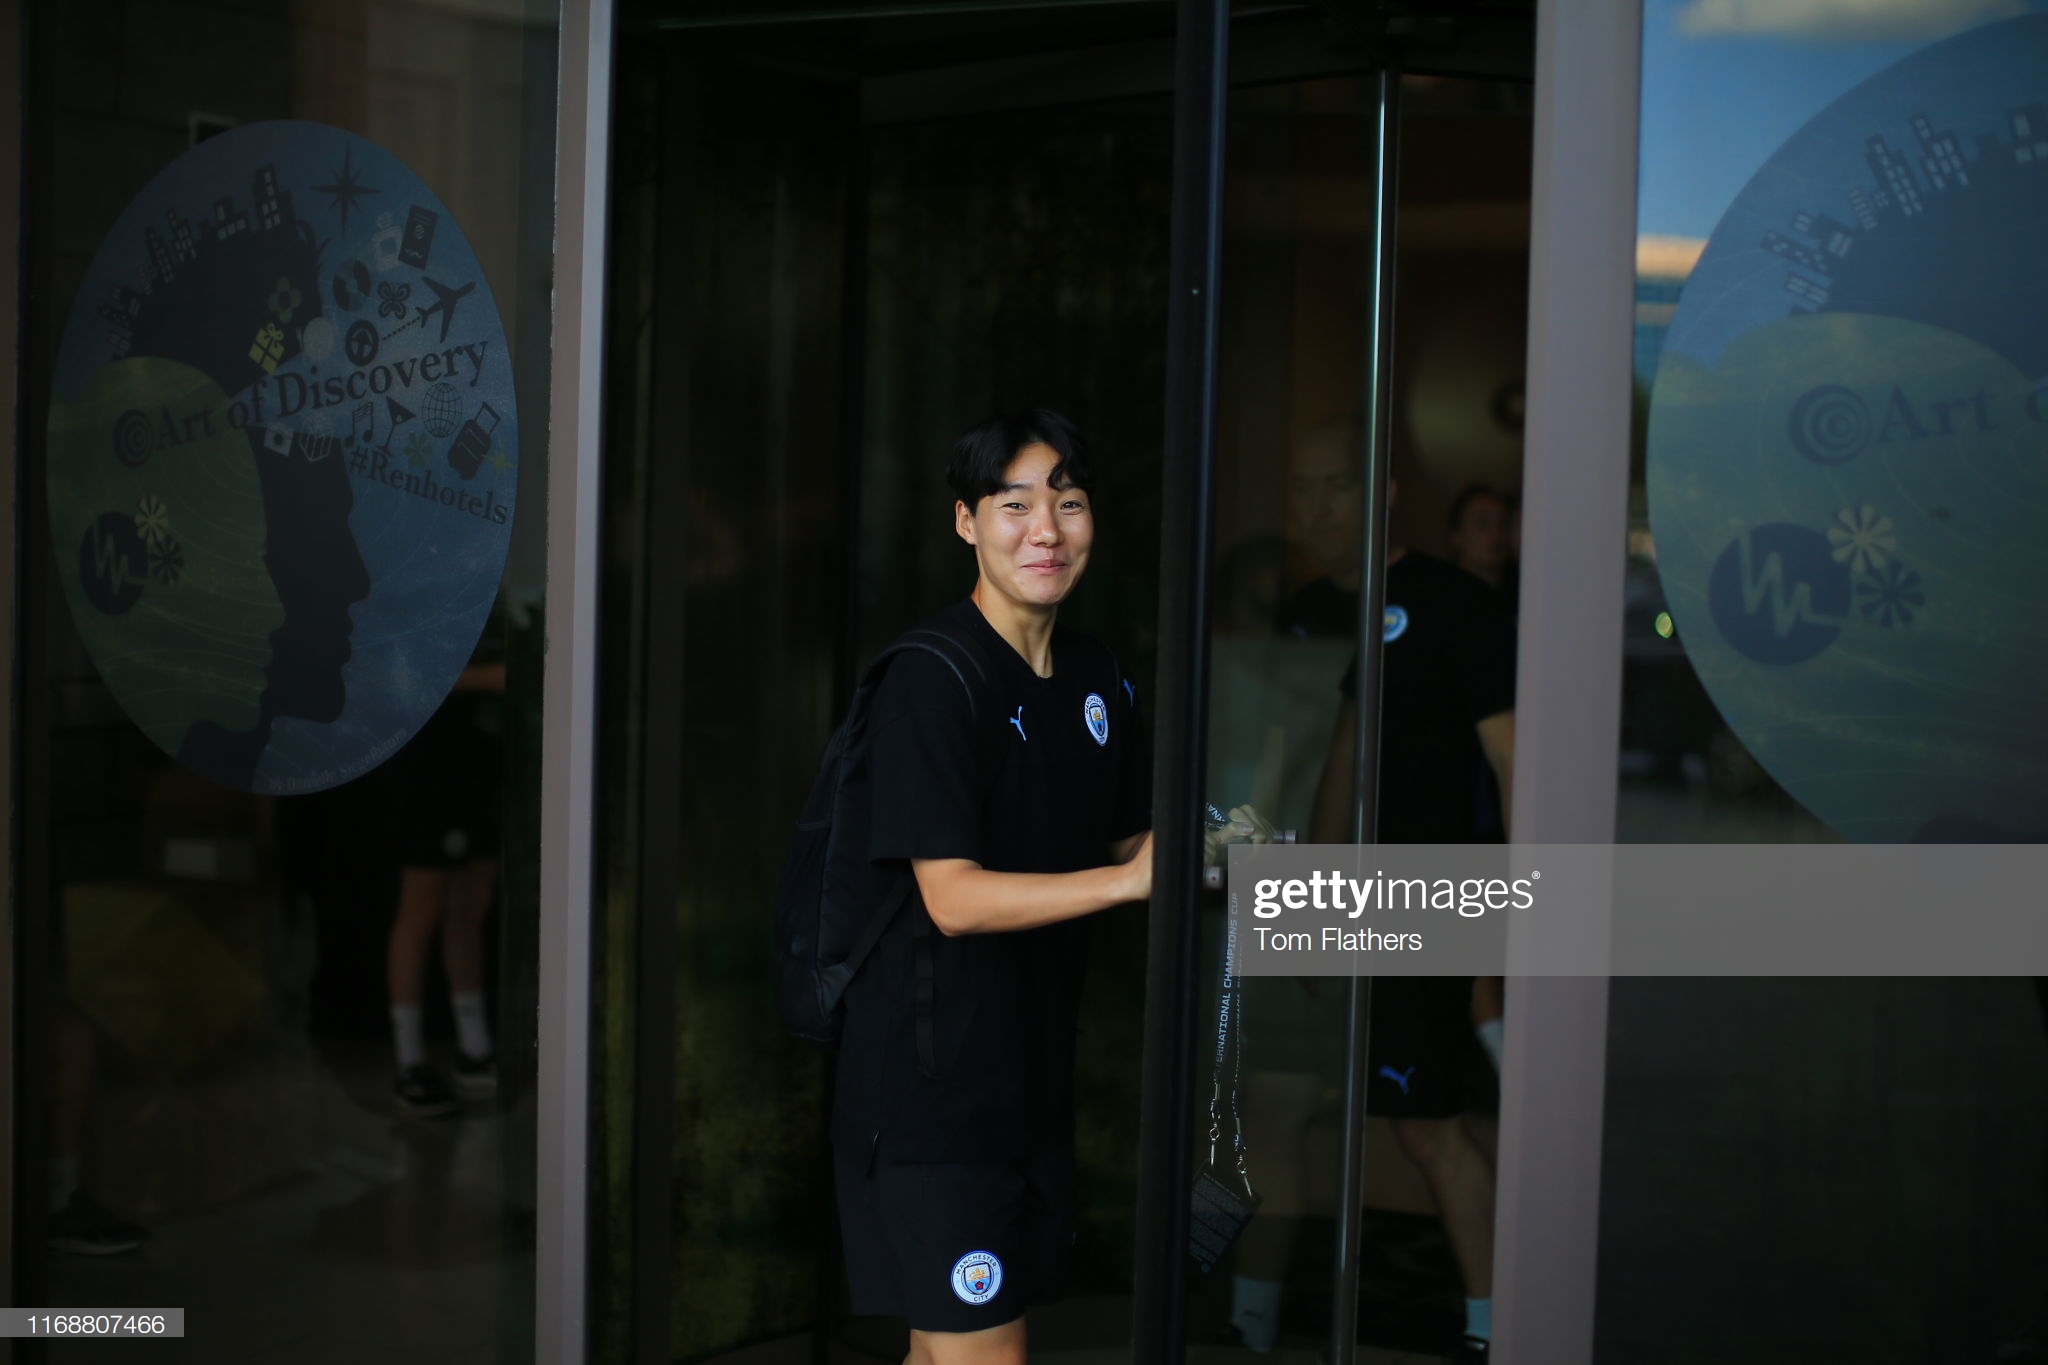 gettyimages-1168807466-2048x2048.jpg